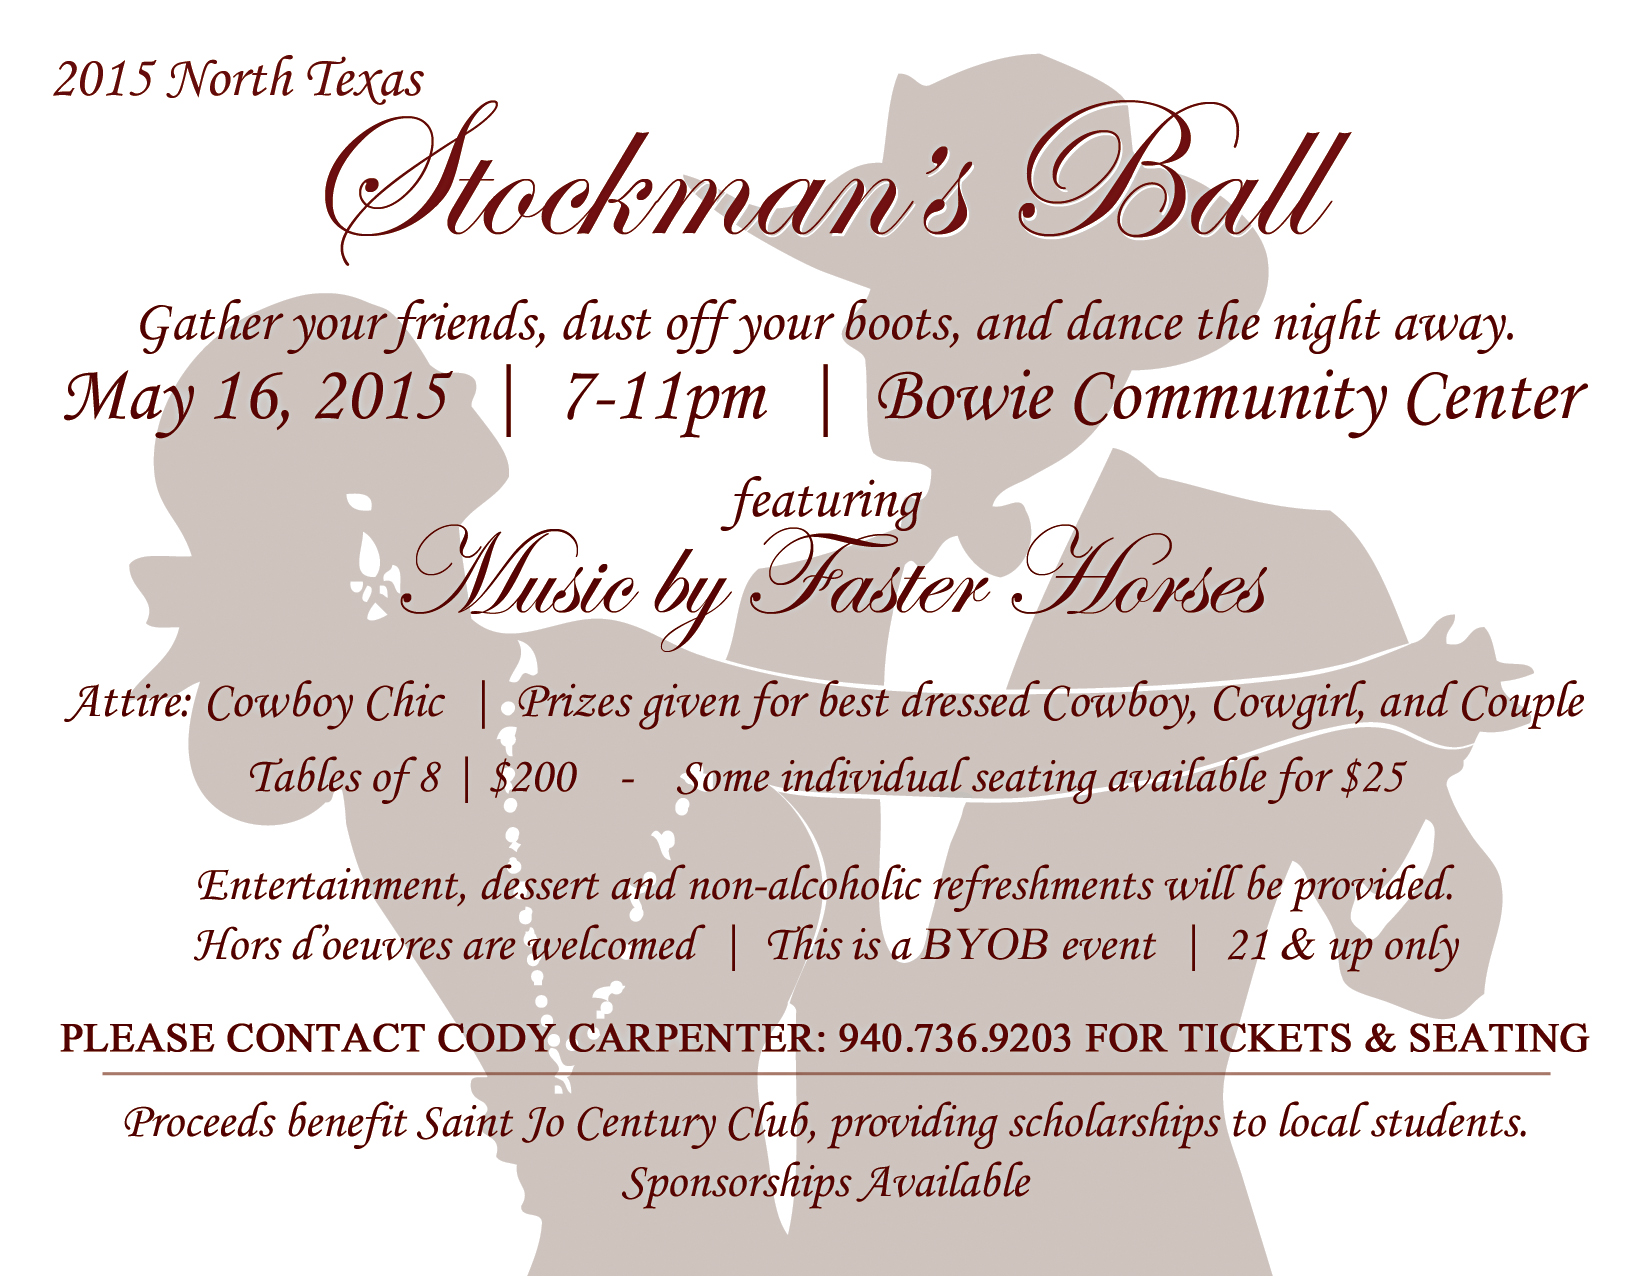 Stockman's Ball @ Bowie Community Center